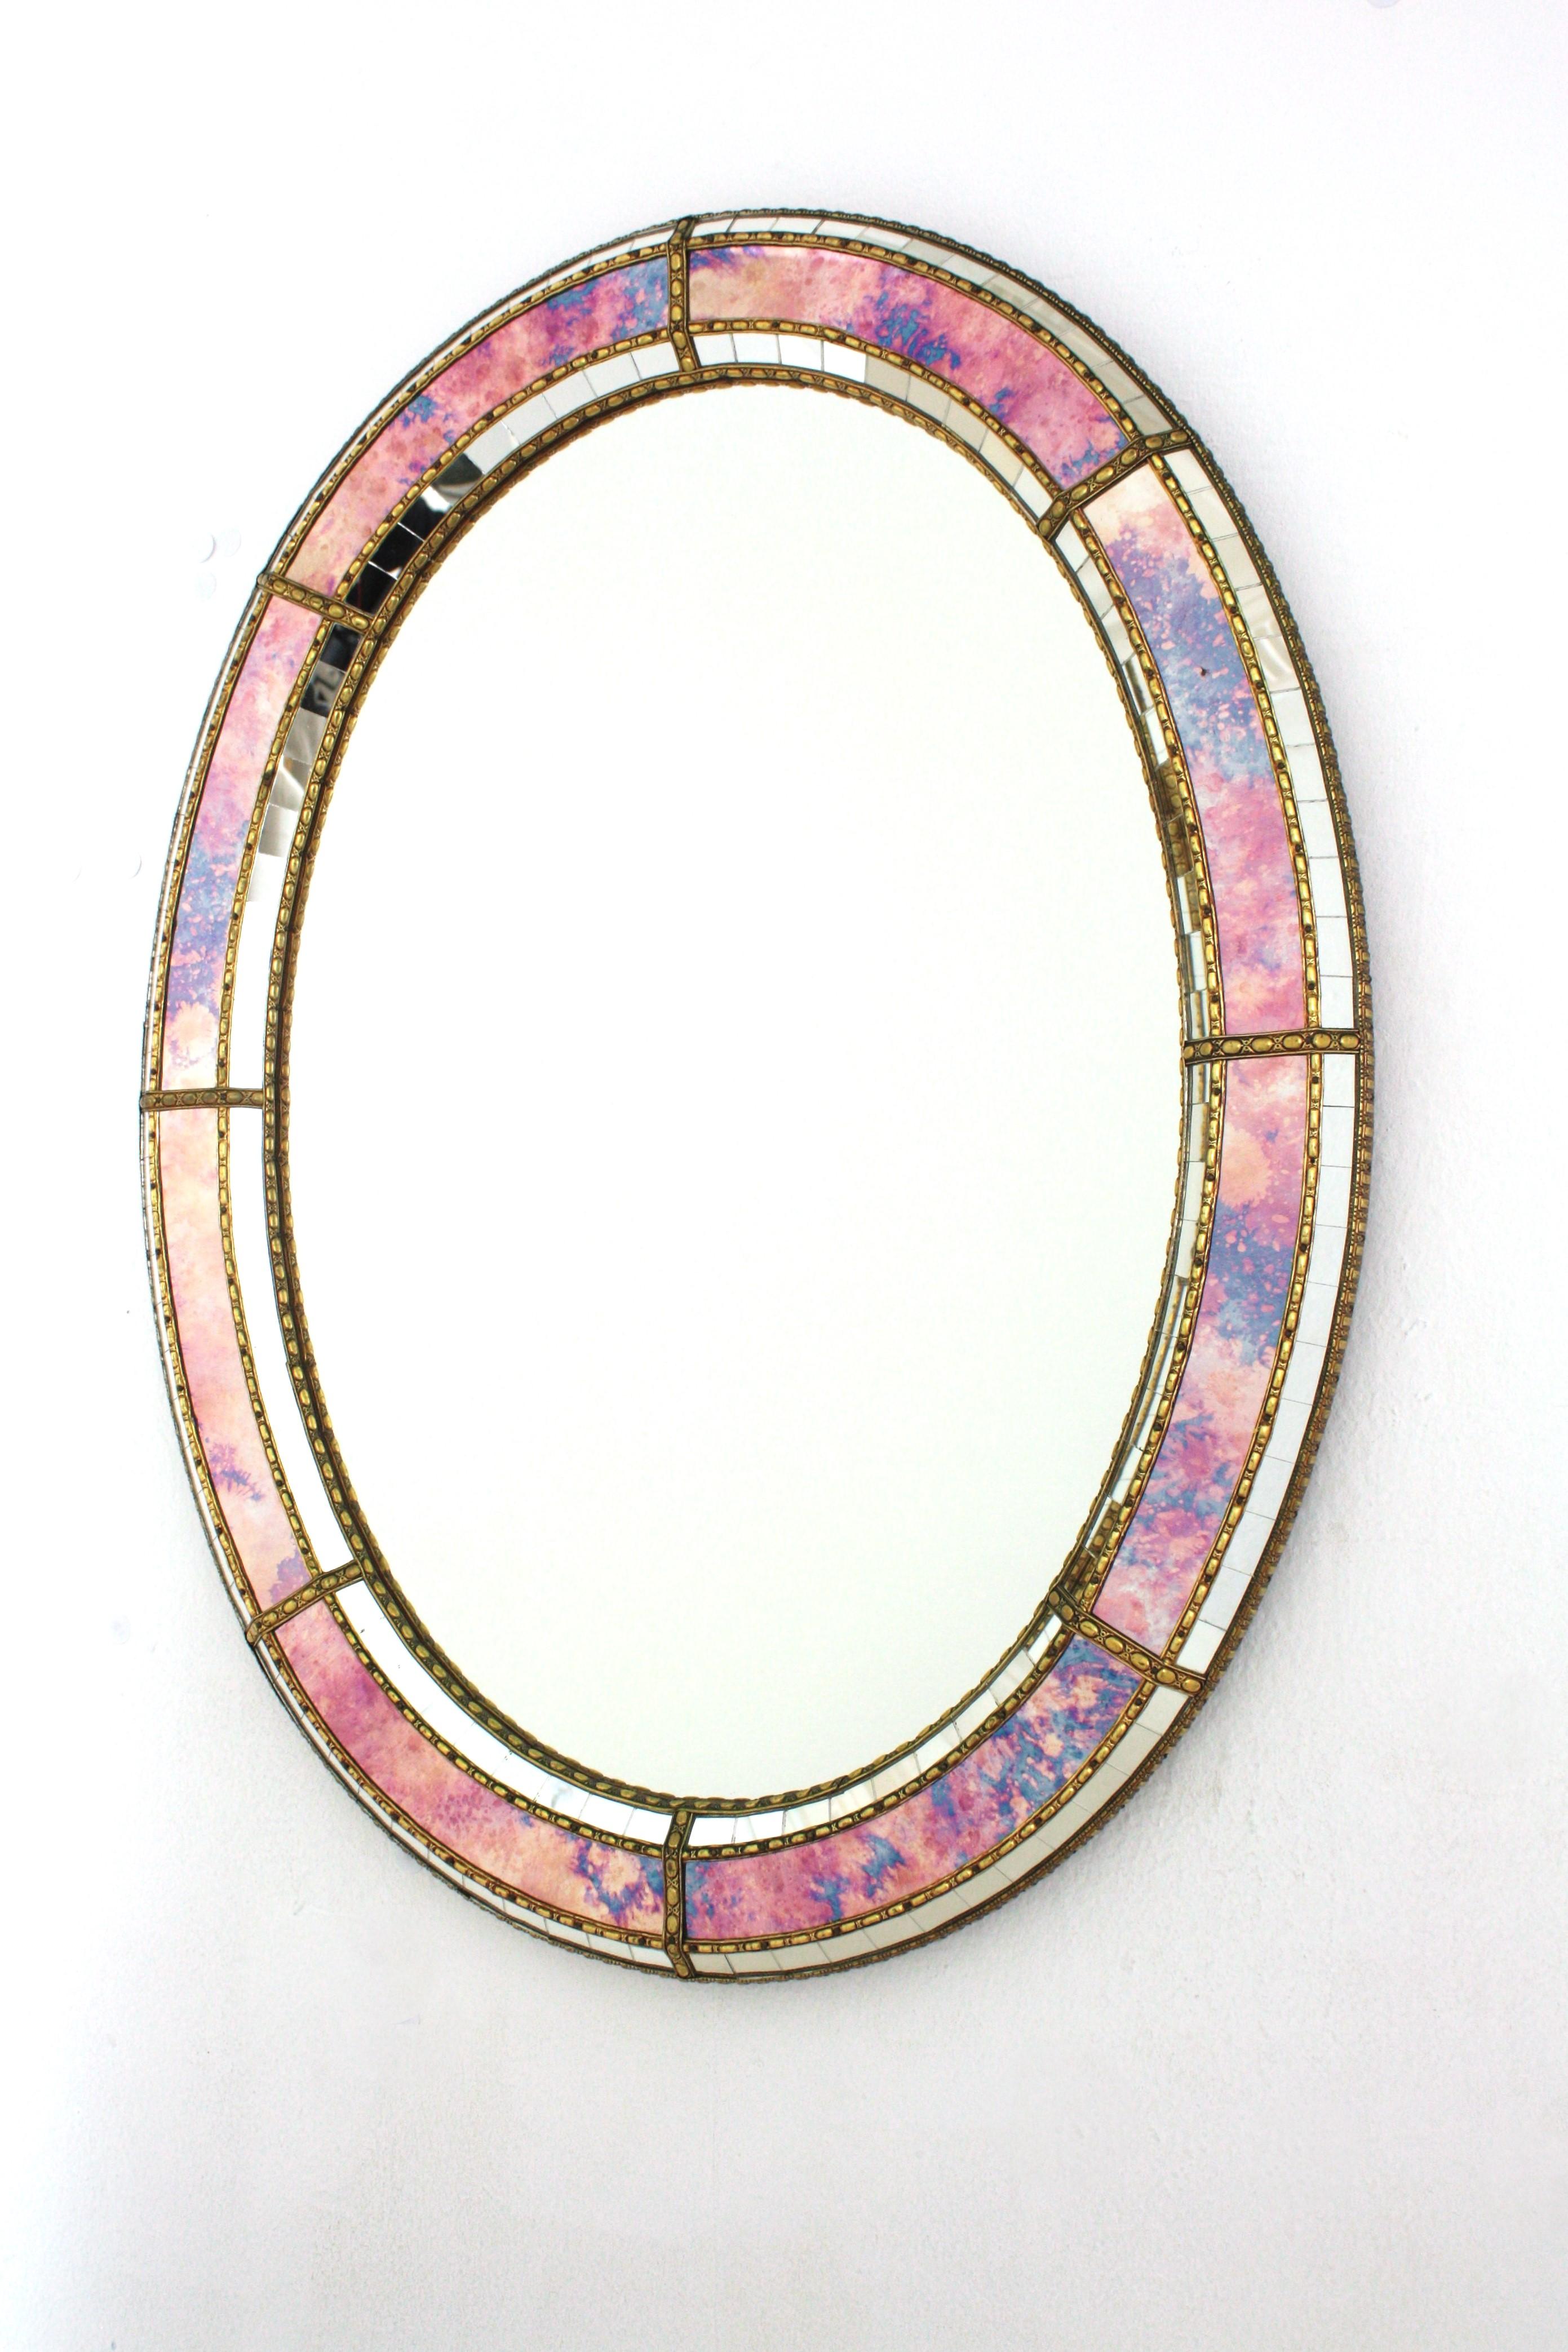 Oval Venetian Style Mirror with Pink Purple Glass and Brass Details 1